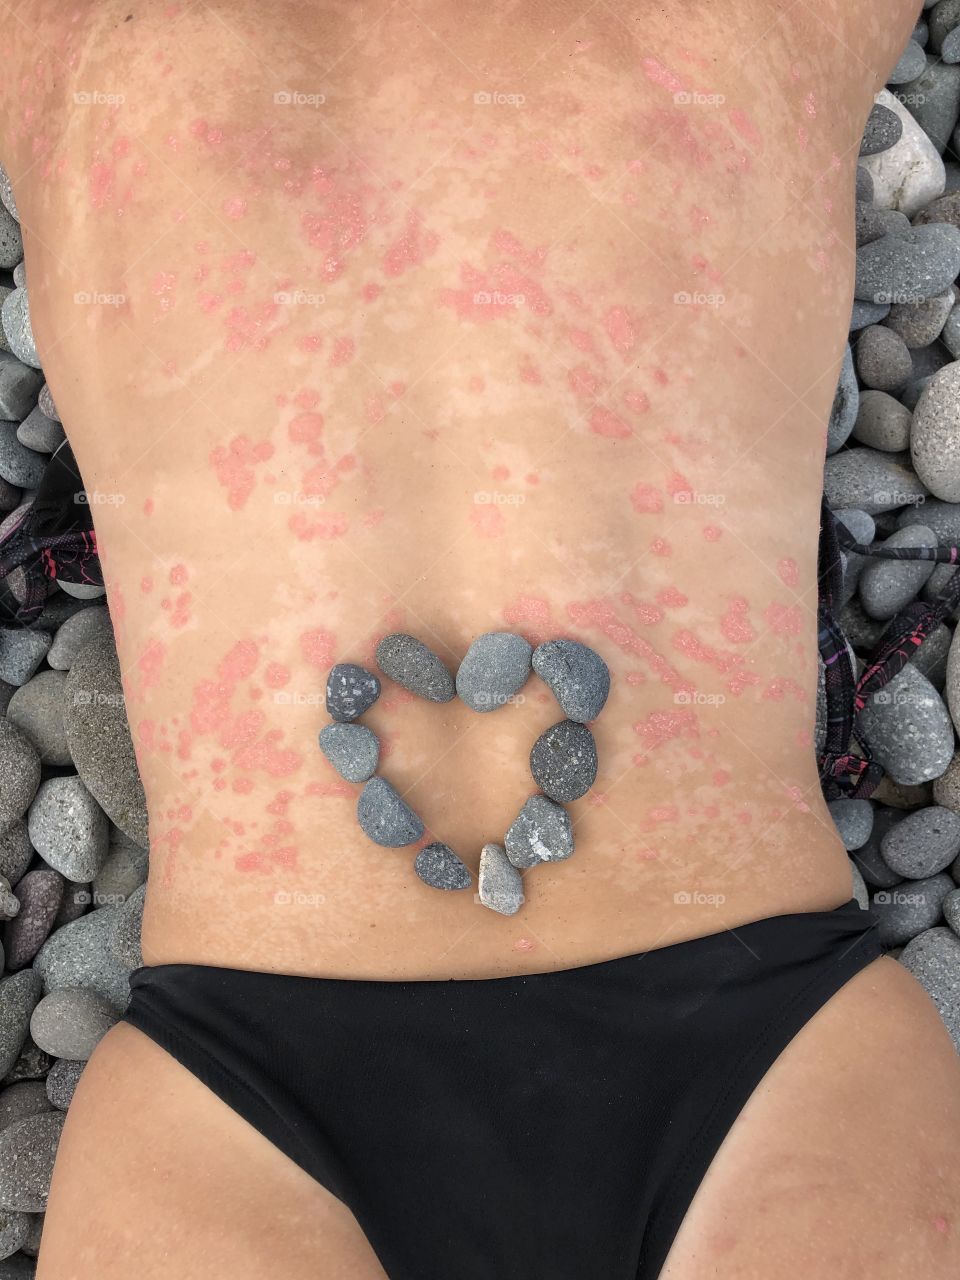 I’m insecure about my back but my insecurities don’t hold me back. Confidence at the beach. Skin mosaic. Looking out and looking within. Rocky coast.